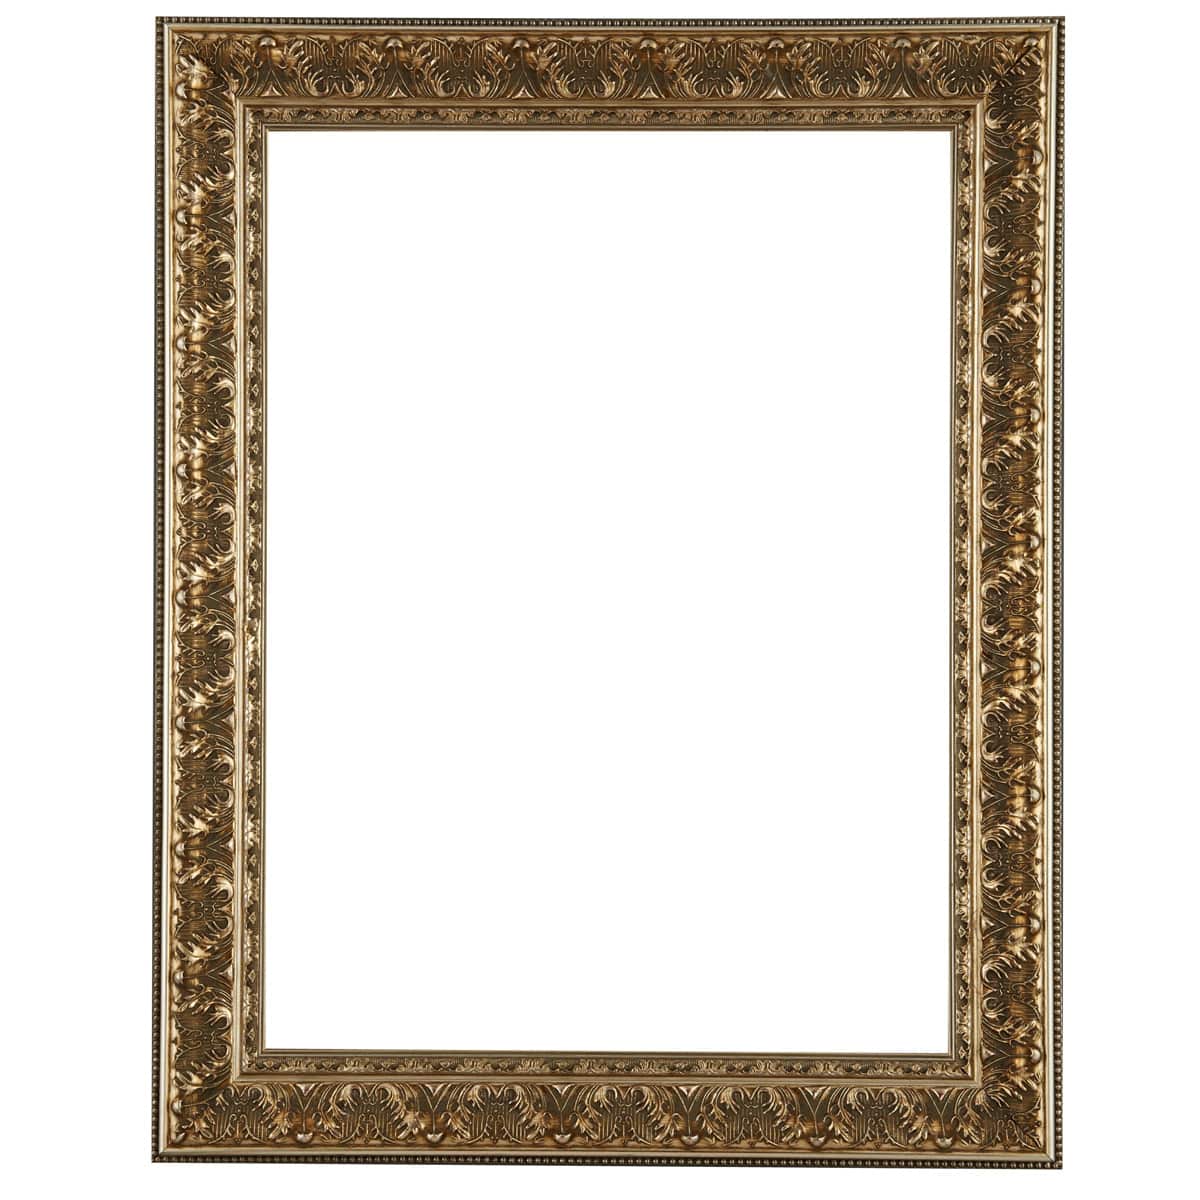 Picture Frame Backing Clips Brass 1 with Screws Large Size 100 Pack - - On  Sale - Bed Bath & Beyond - 38160083